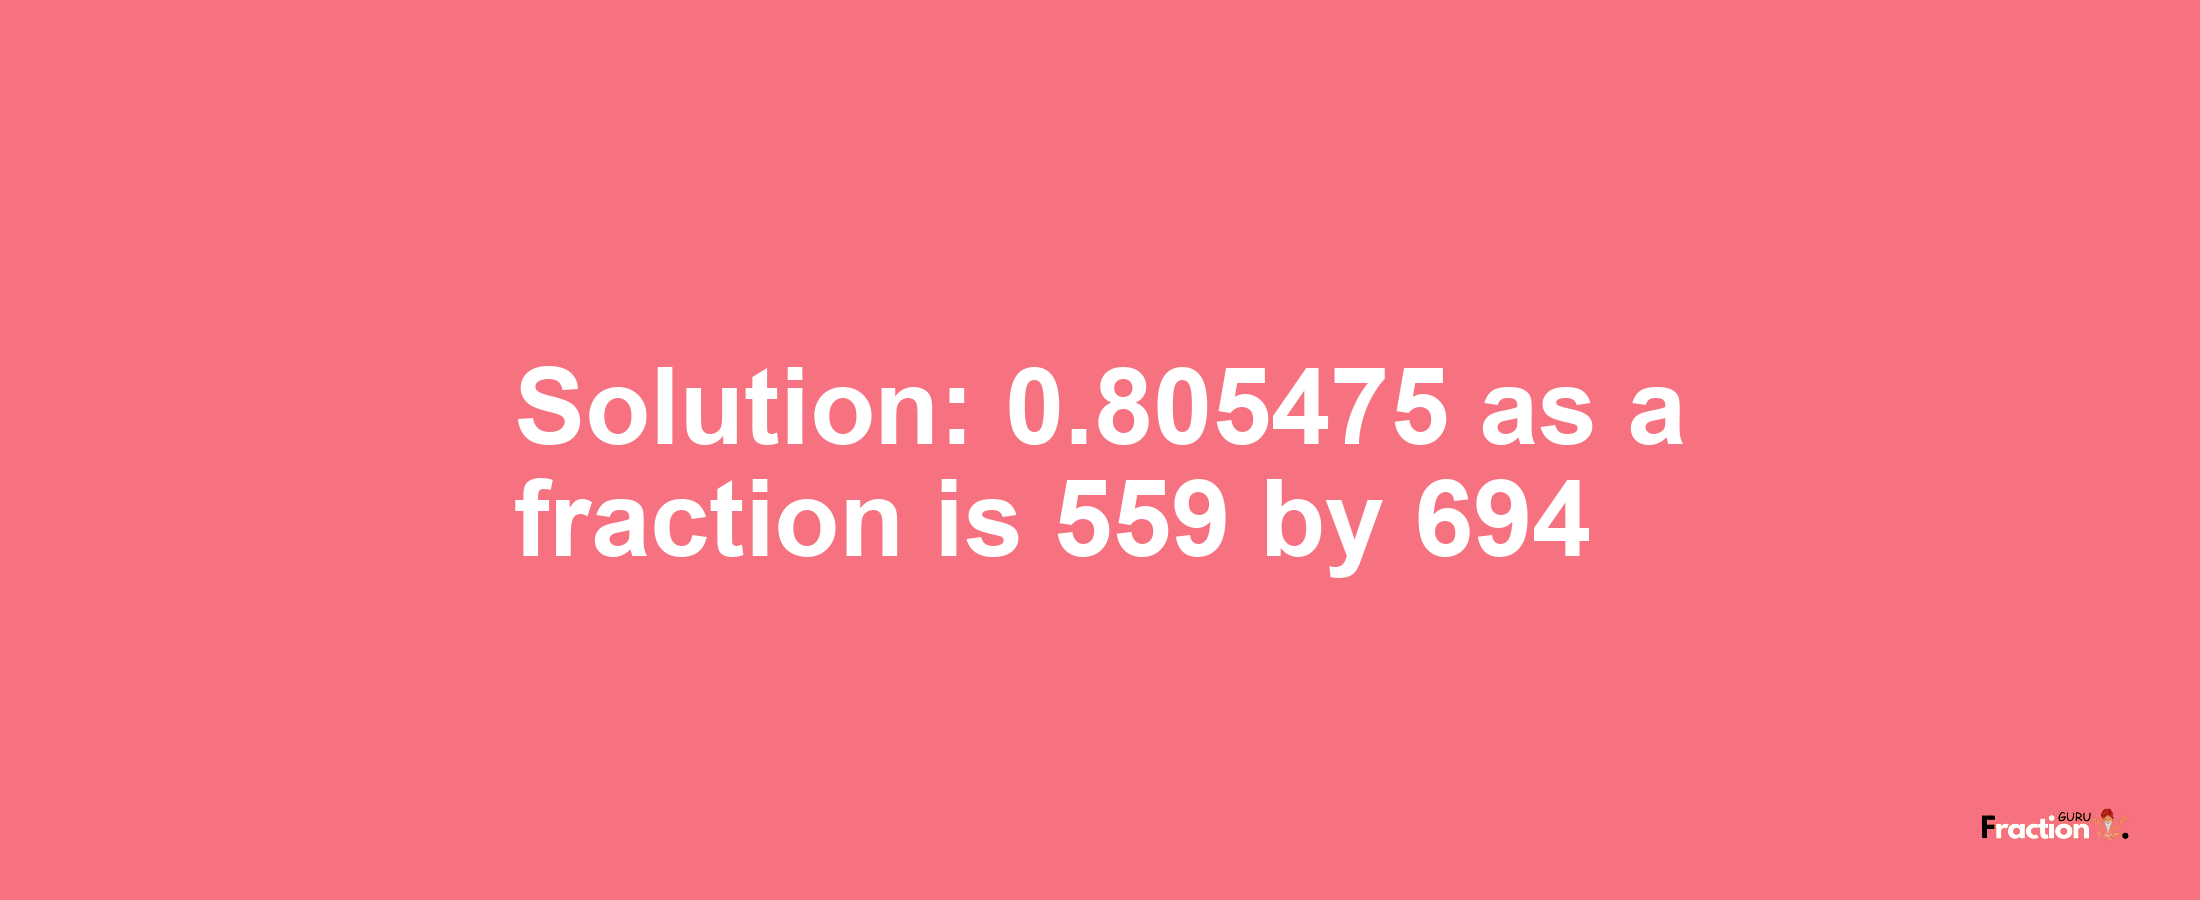 Solution:0.805475 as a fraction is 559/694